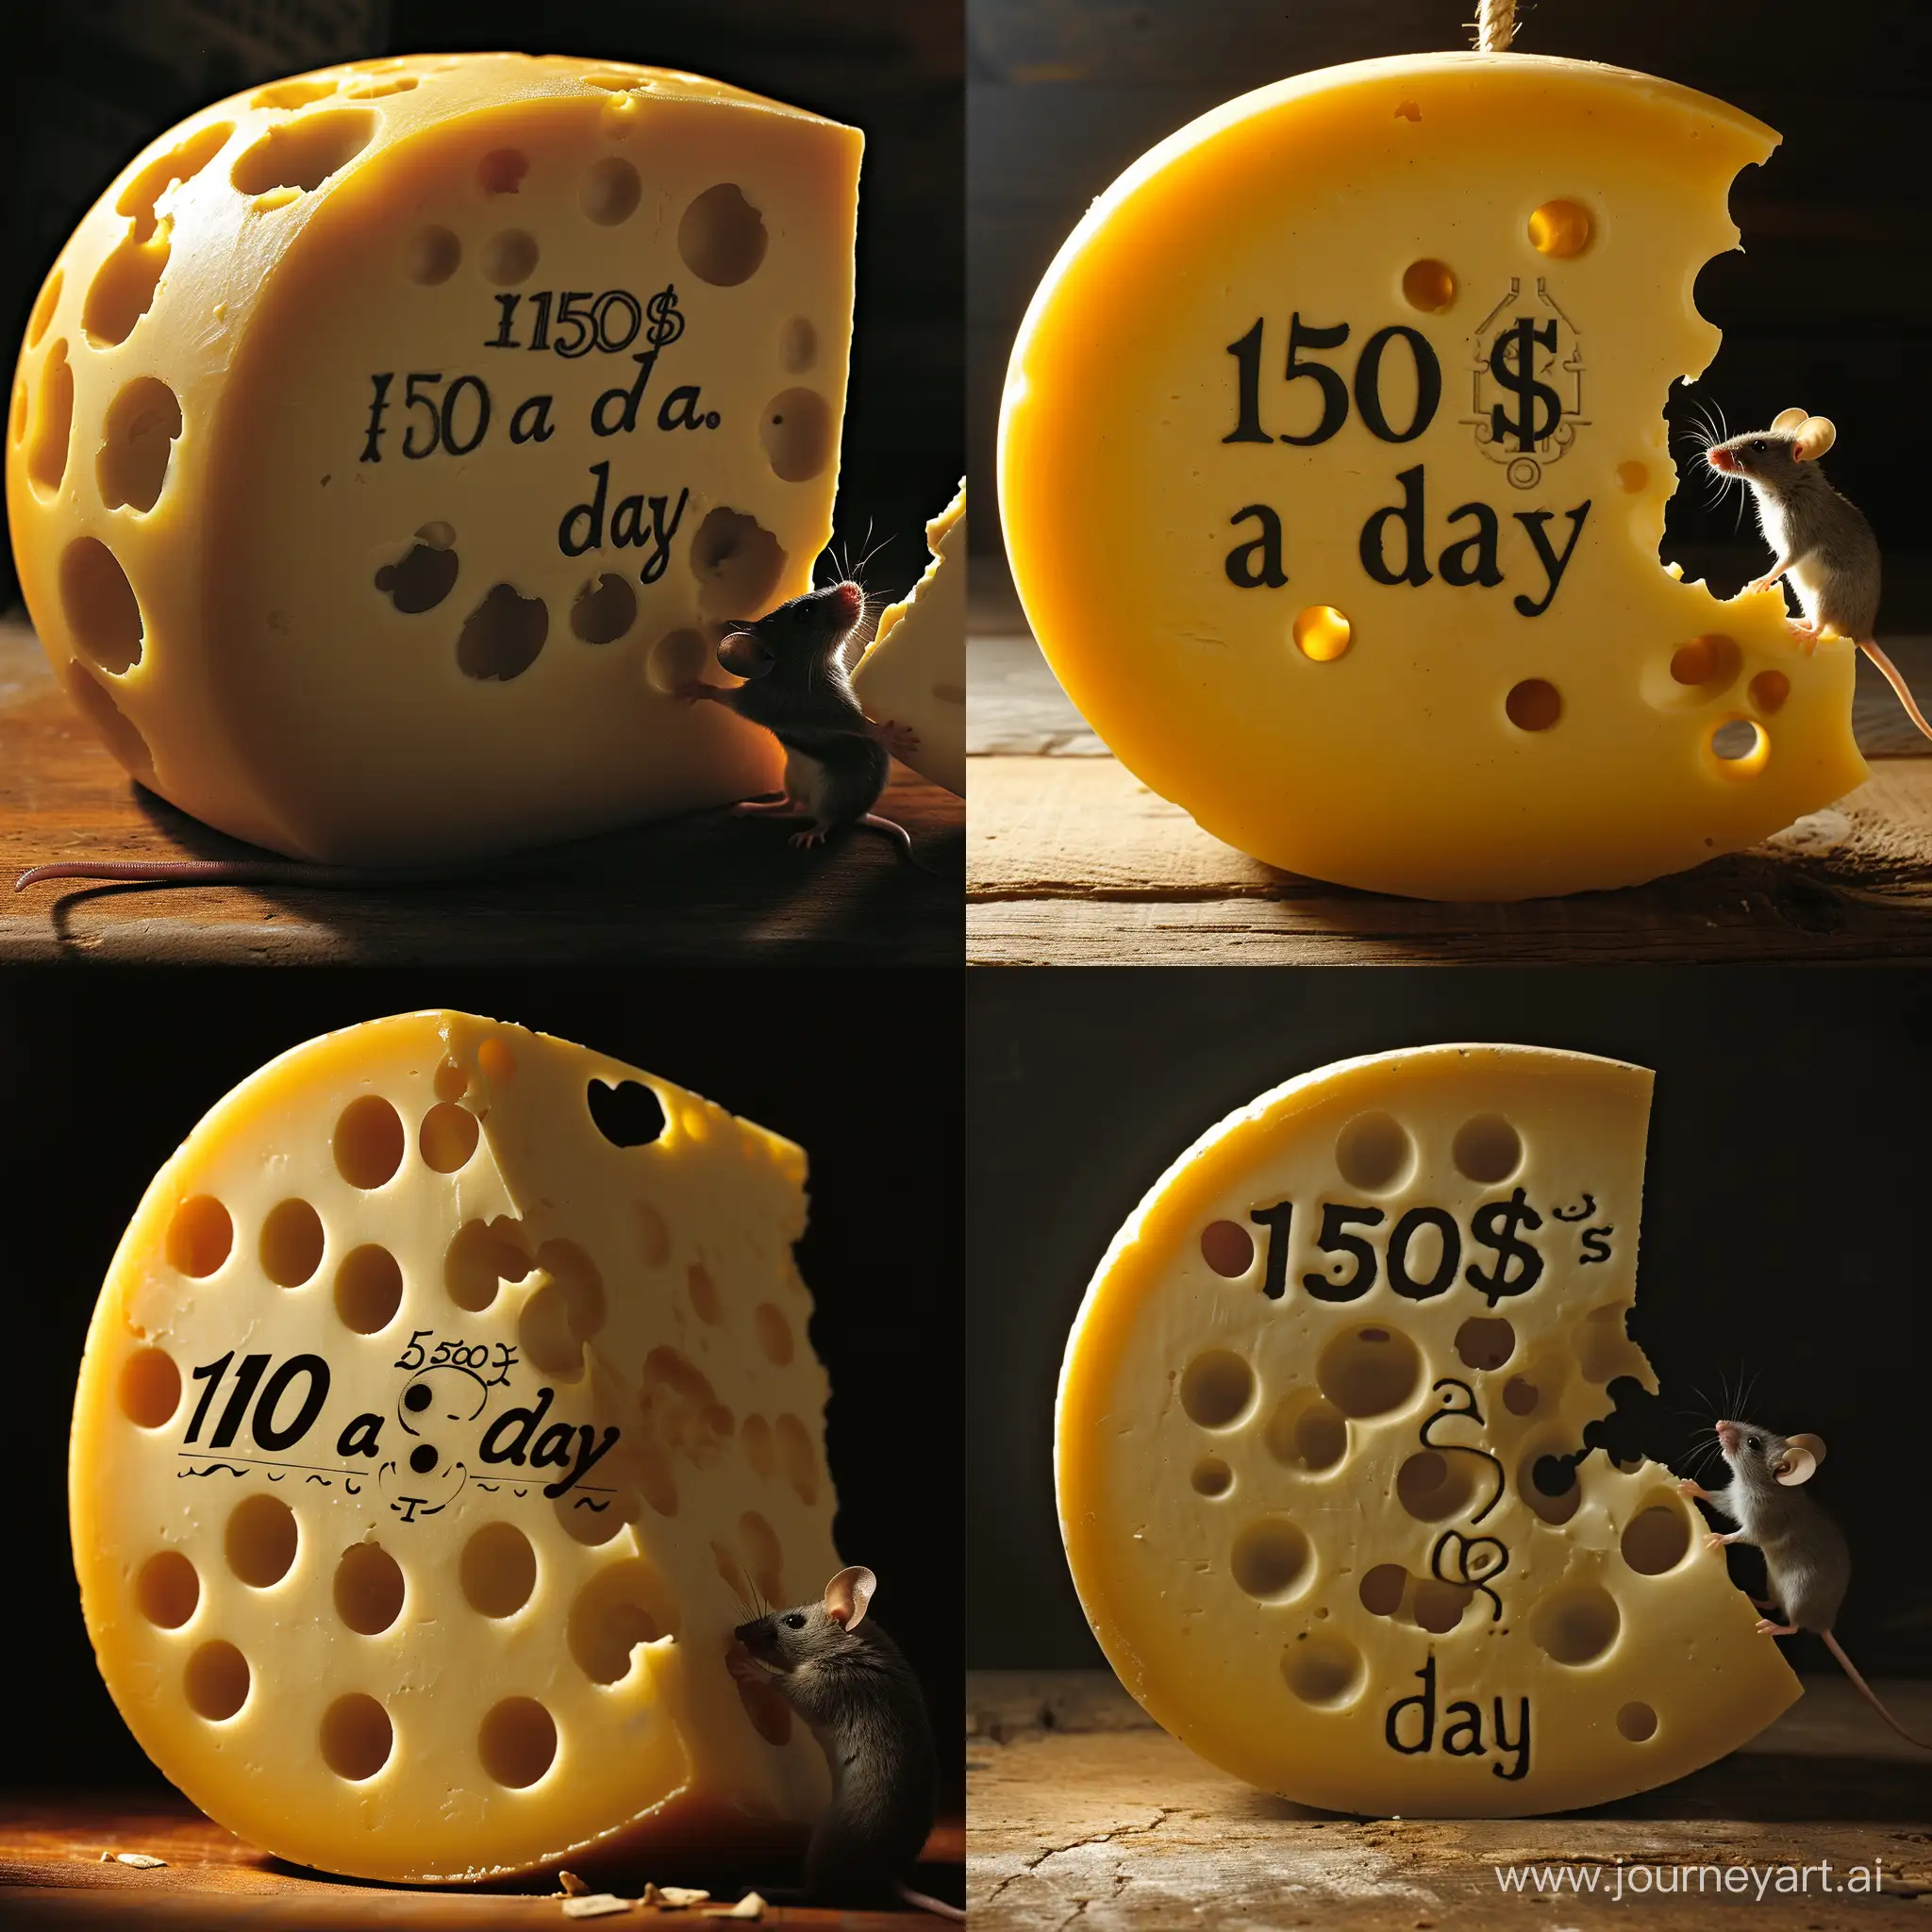 Cheese-with-a-Mouse-Unique-150-a-Day-Offer